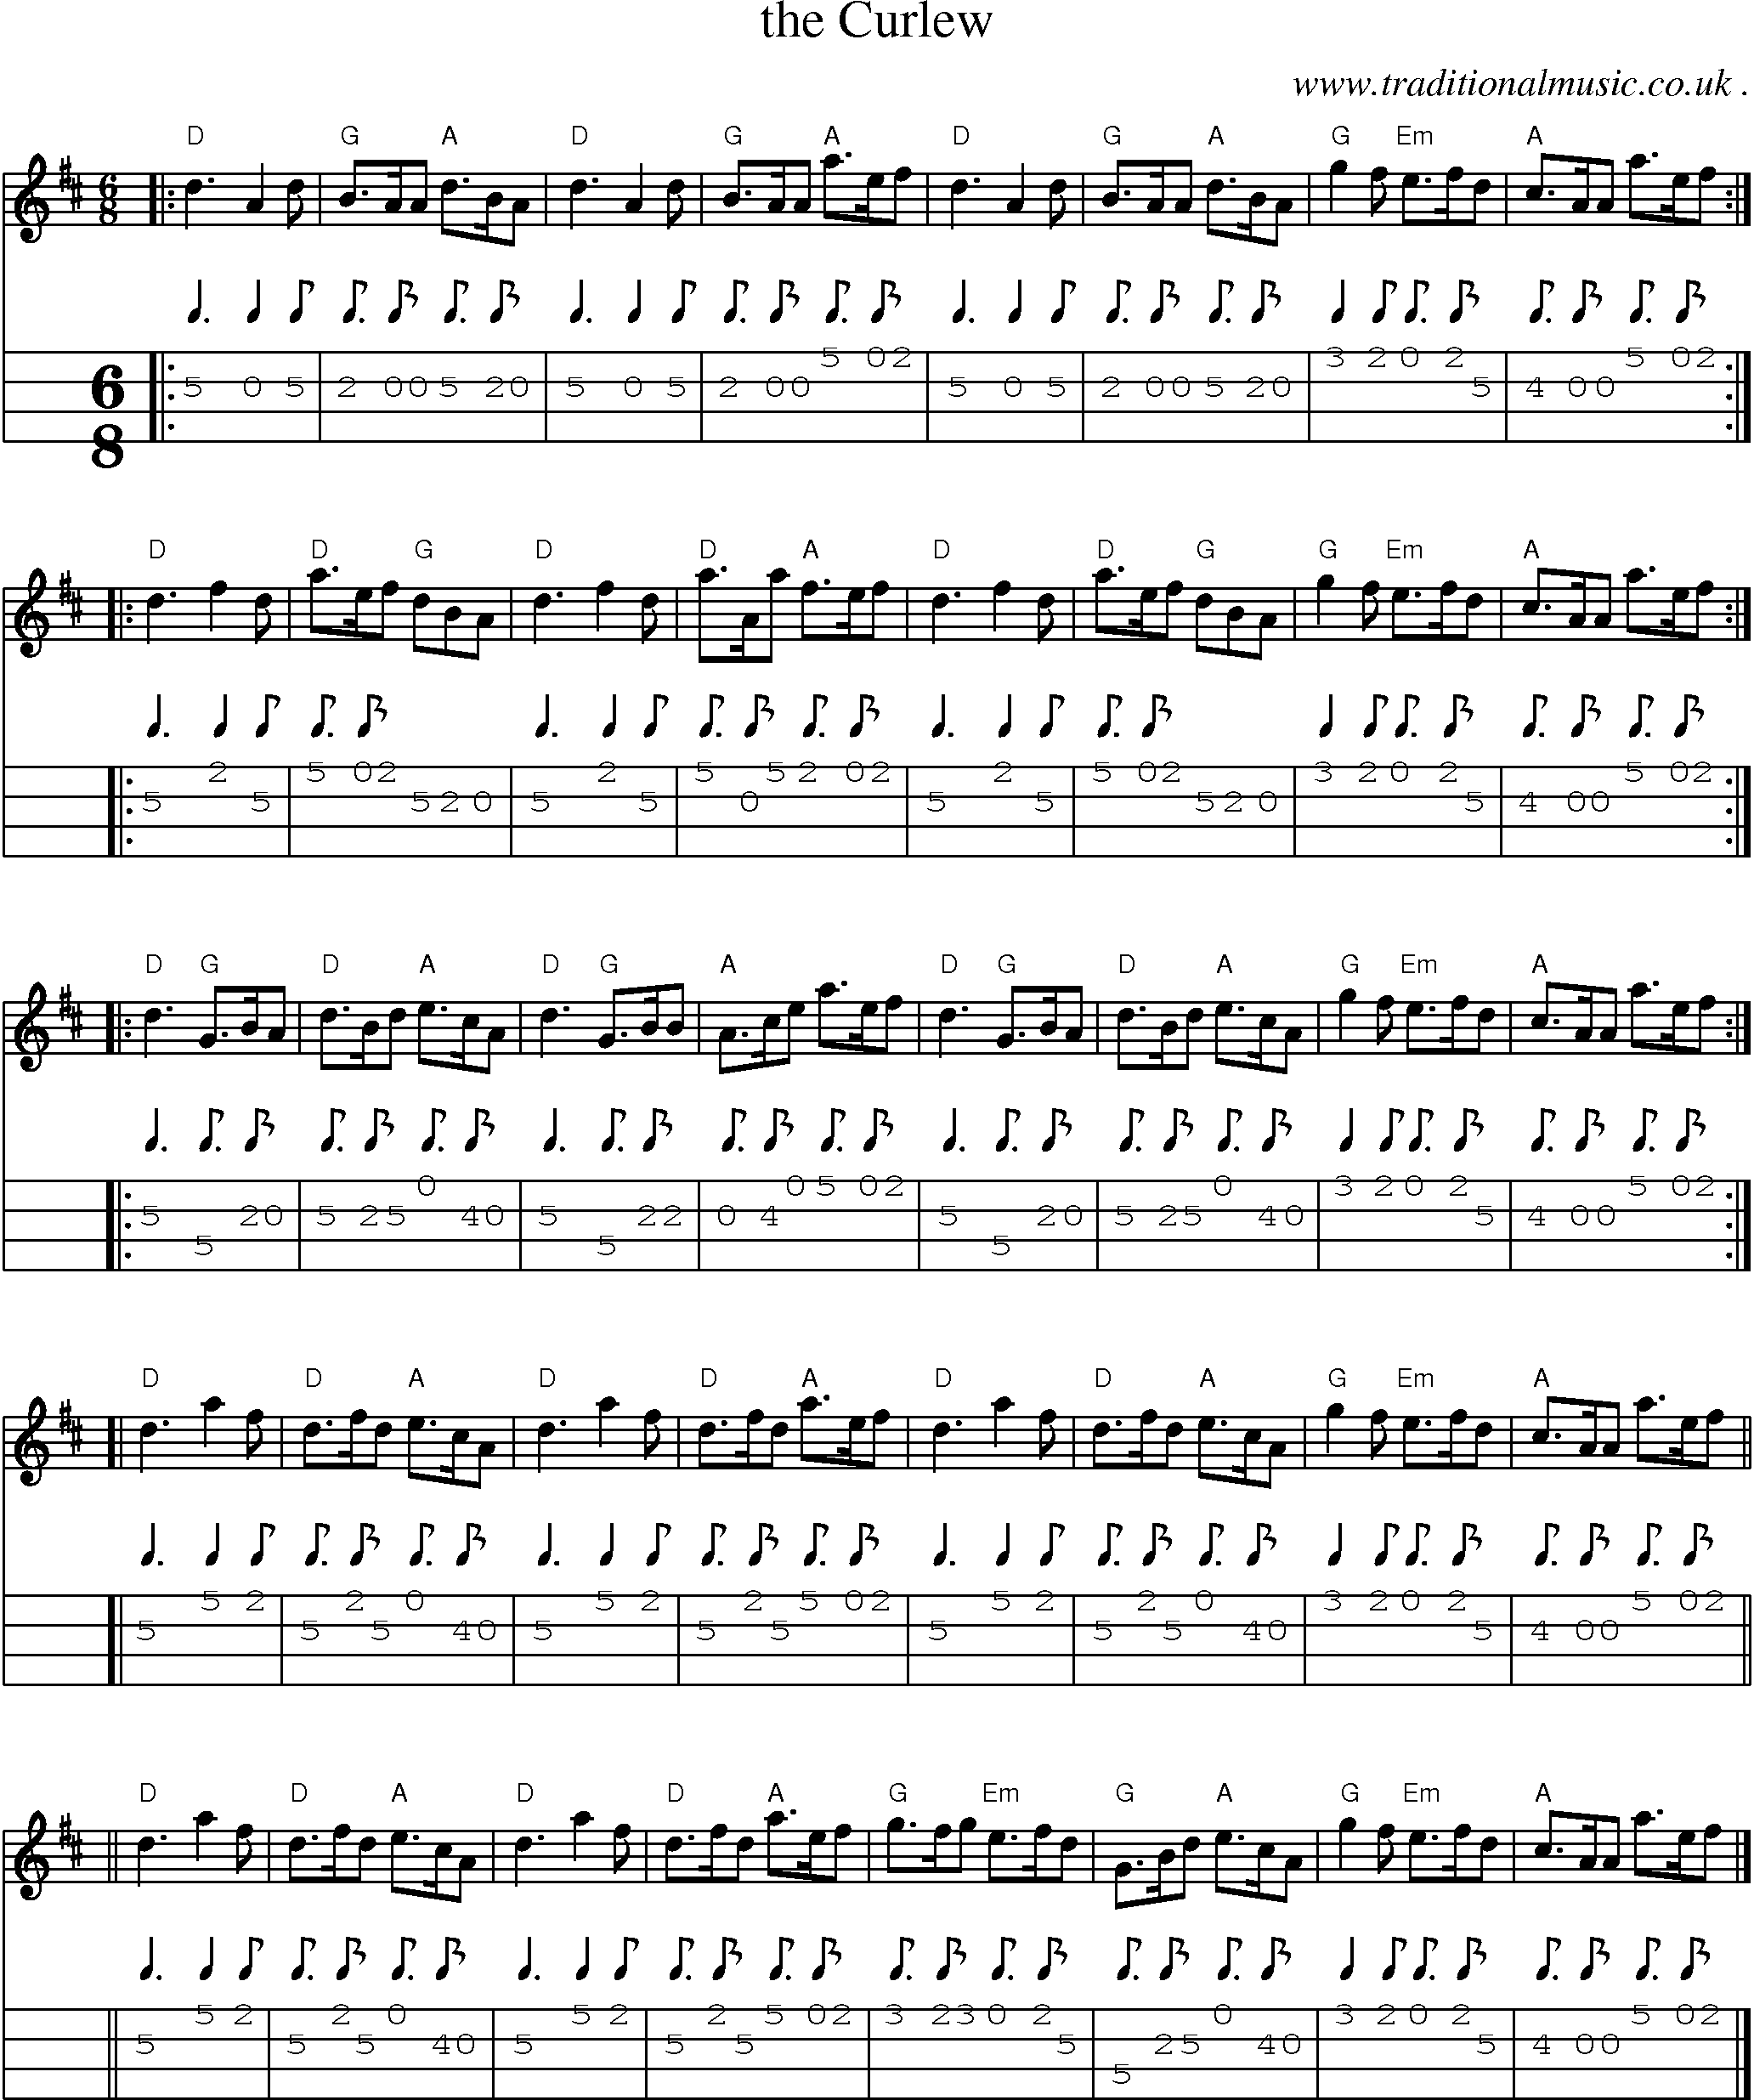 Sheet-music  score, Chords and Mandolin Tabs for The Curlew